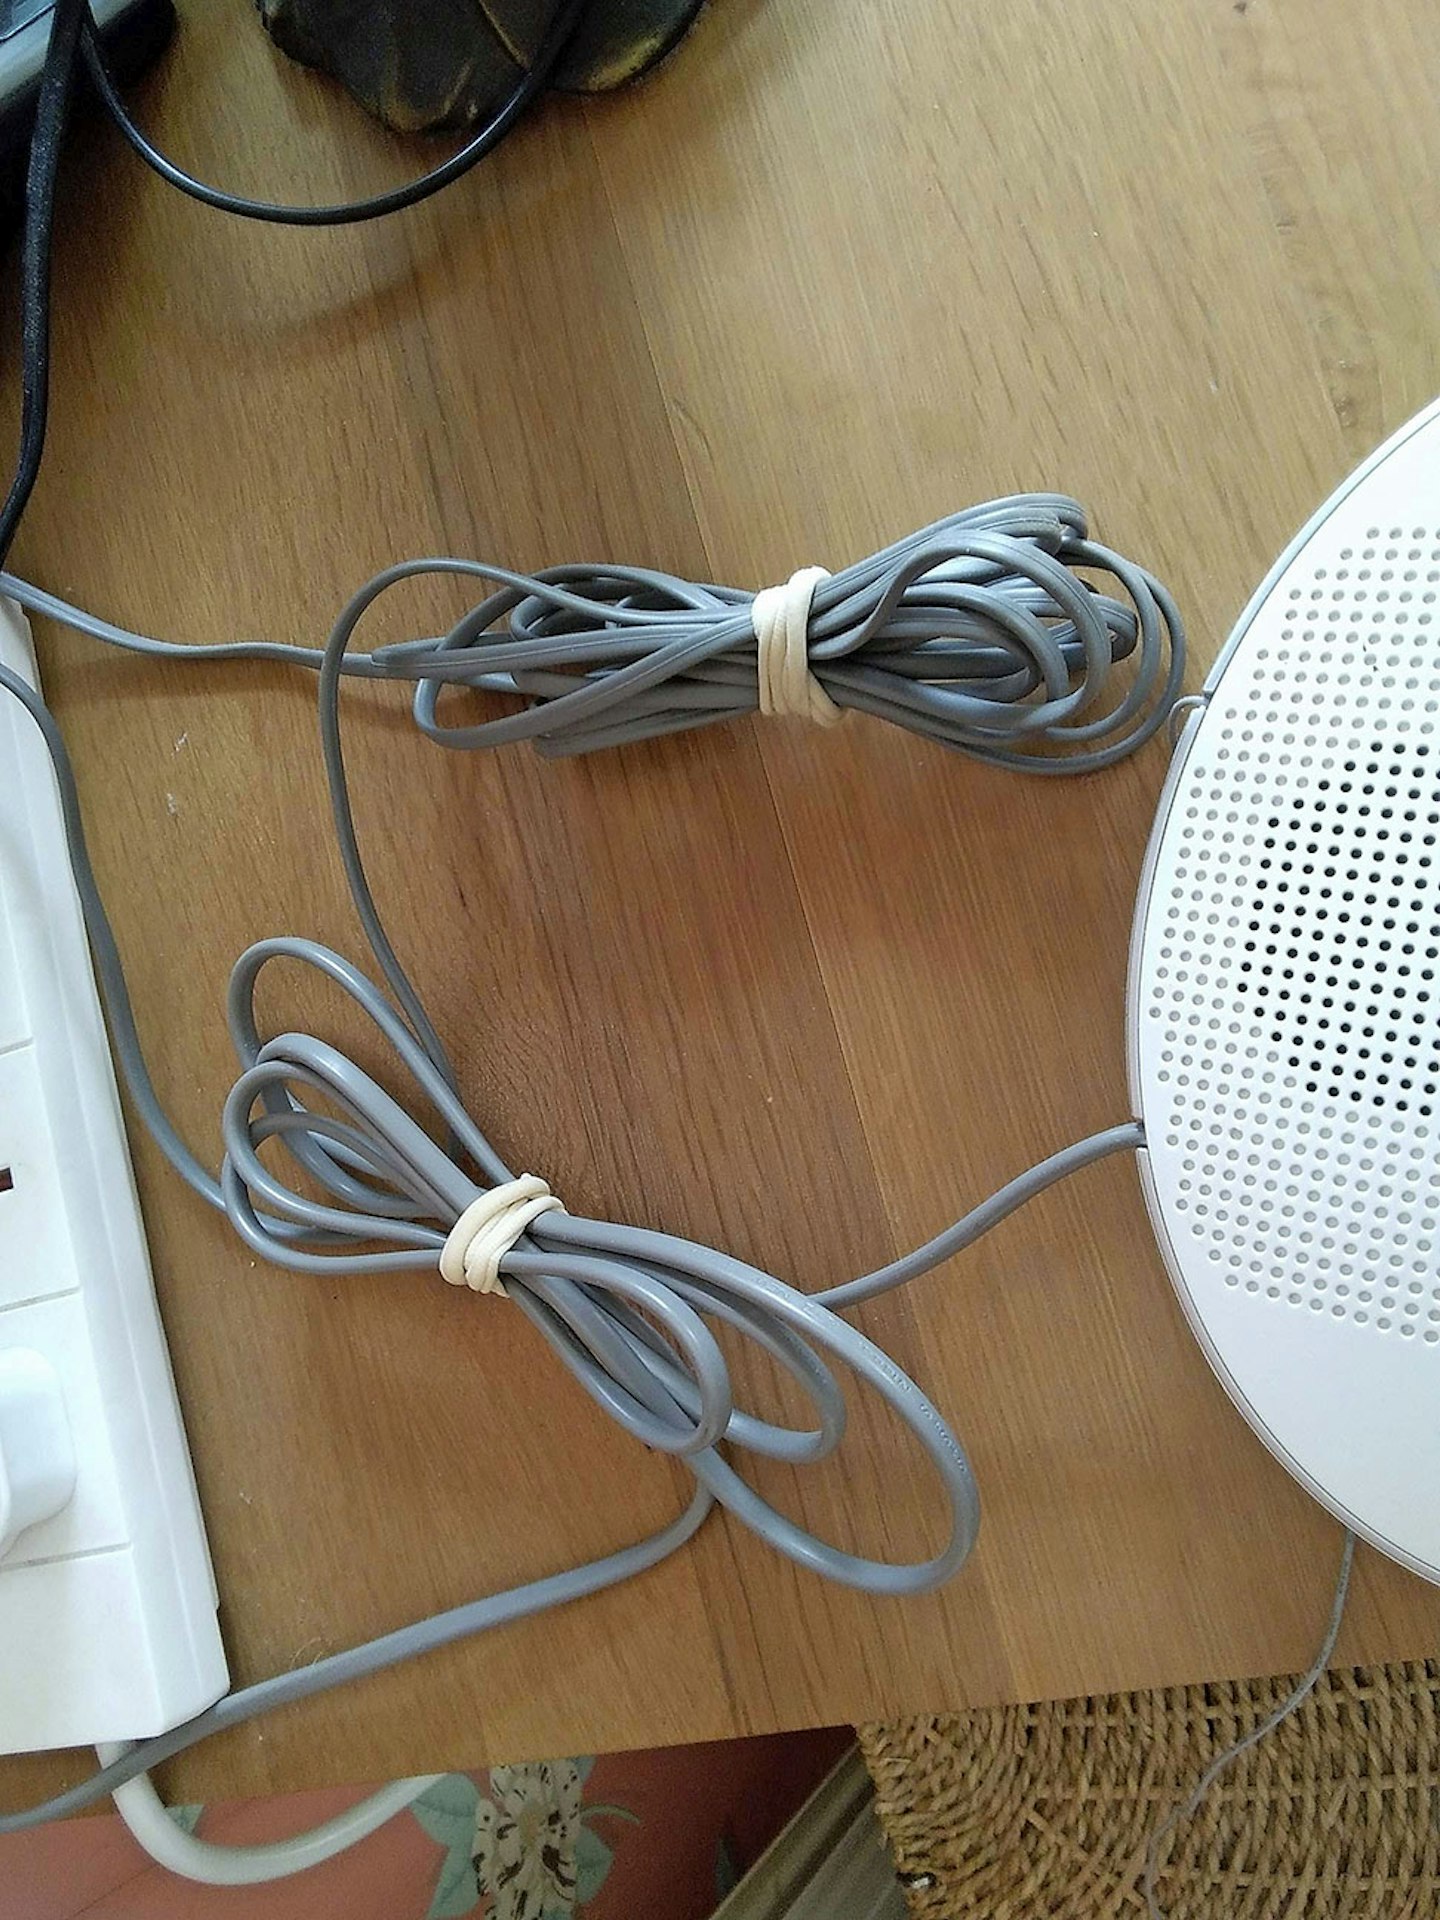 Cable tidy hack